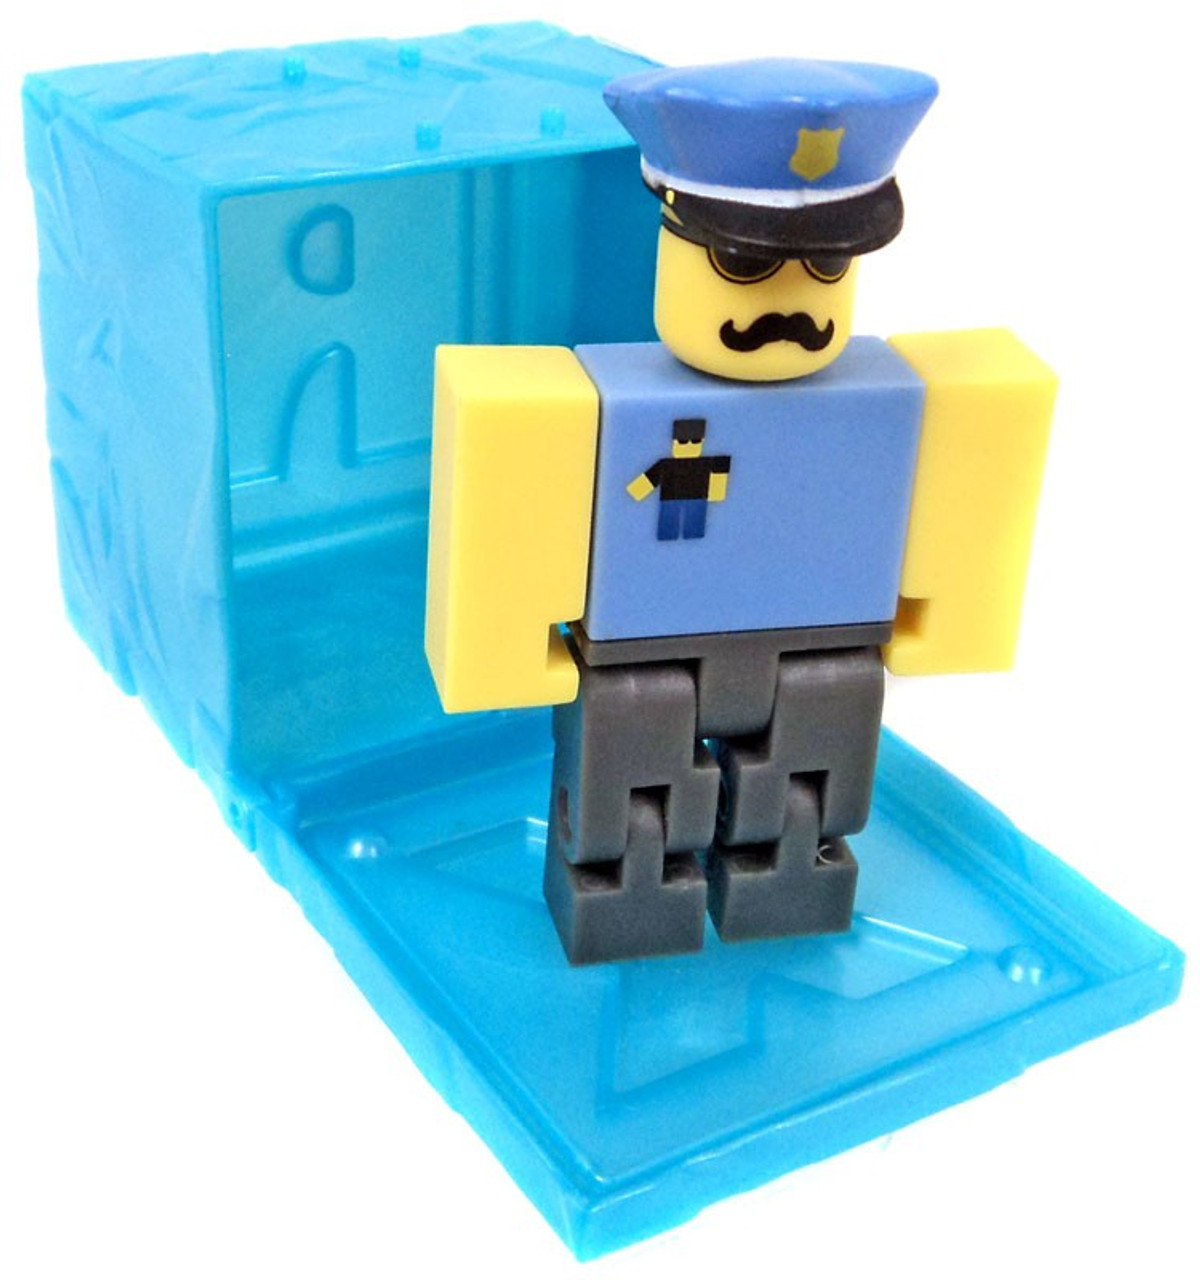 Roblox Red Series 3 Retail Tycoon Rent A Cop 3 Mini Figure Blue Cube With Online Code Loose Jazwares Toywiz - roblox black ops 3 tycoon